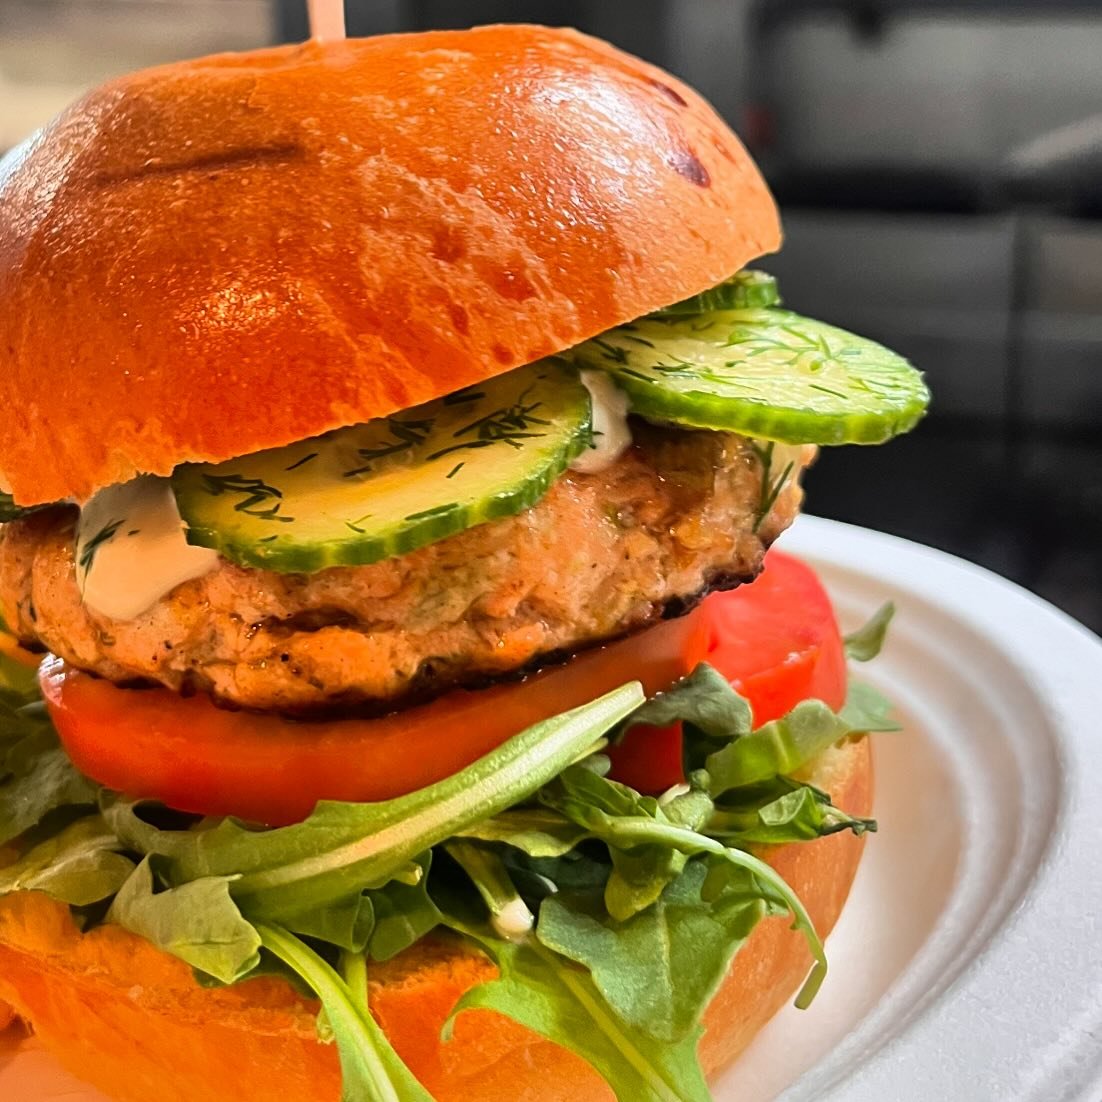 Get your hands on one of these hand-chopped Salmon Burgers at Canal Cafe, topped with crisp arugula, a delicious cucumber-dill slaw and Lemon aioli. 🍋  A perfect blend of Mediterranean flavors to awaken your taste buds. 

#summeriscoming #hamptonsdi